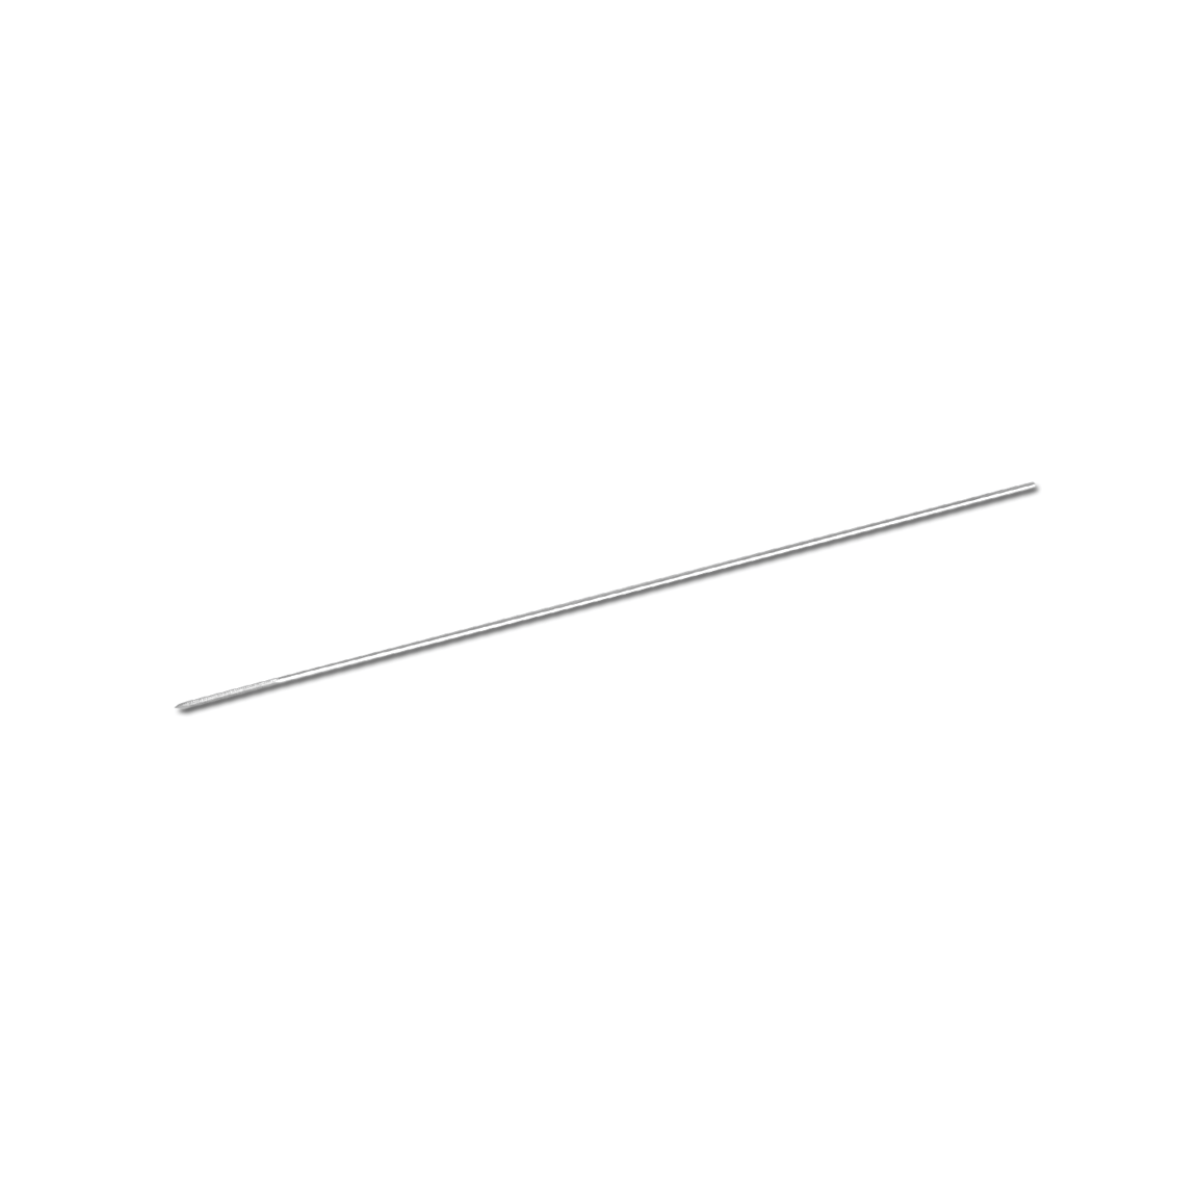 Threaded Guide Wire 1.25mm, 150mm